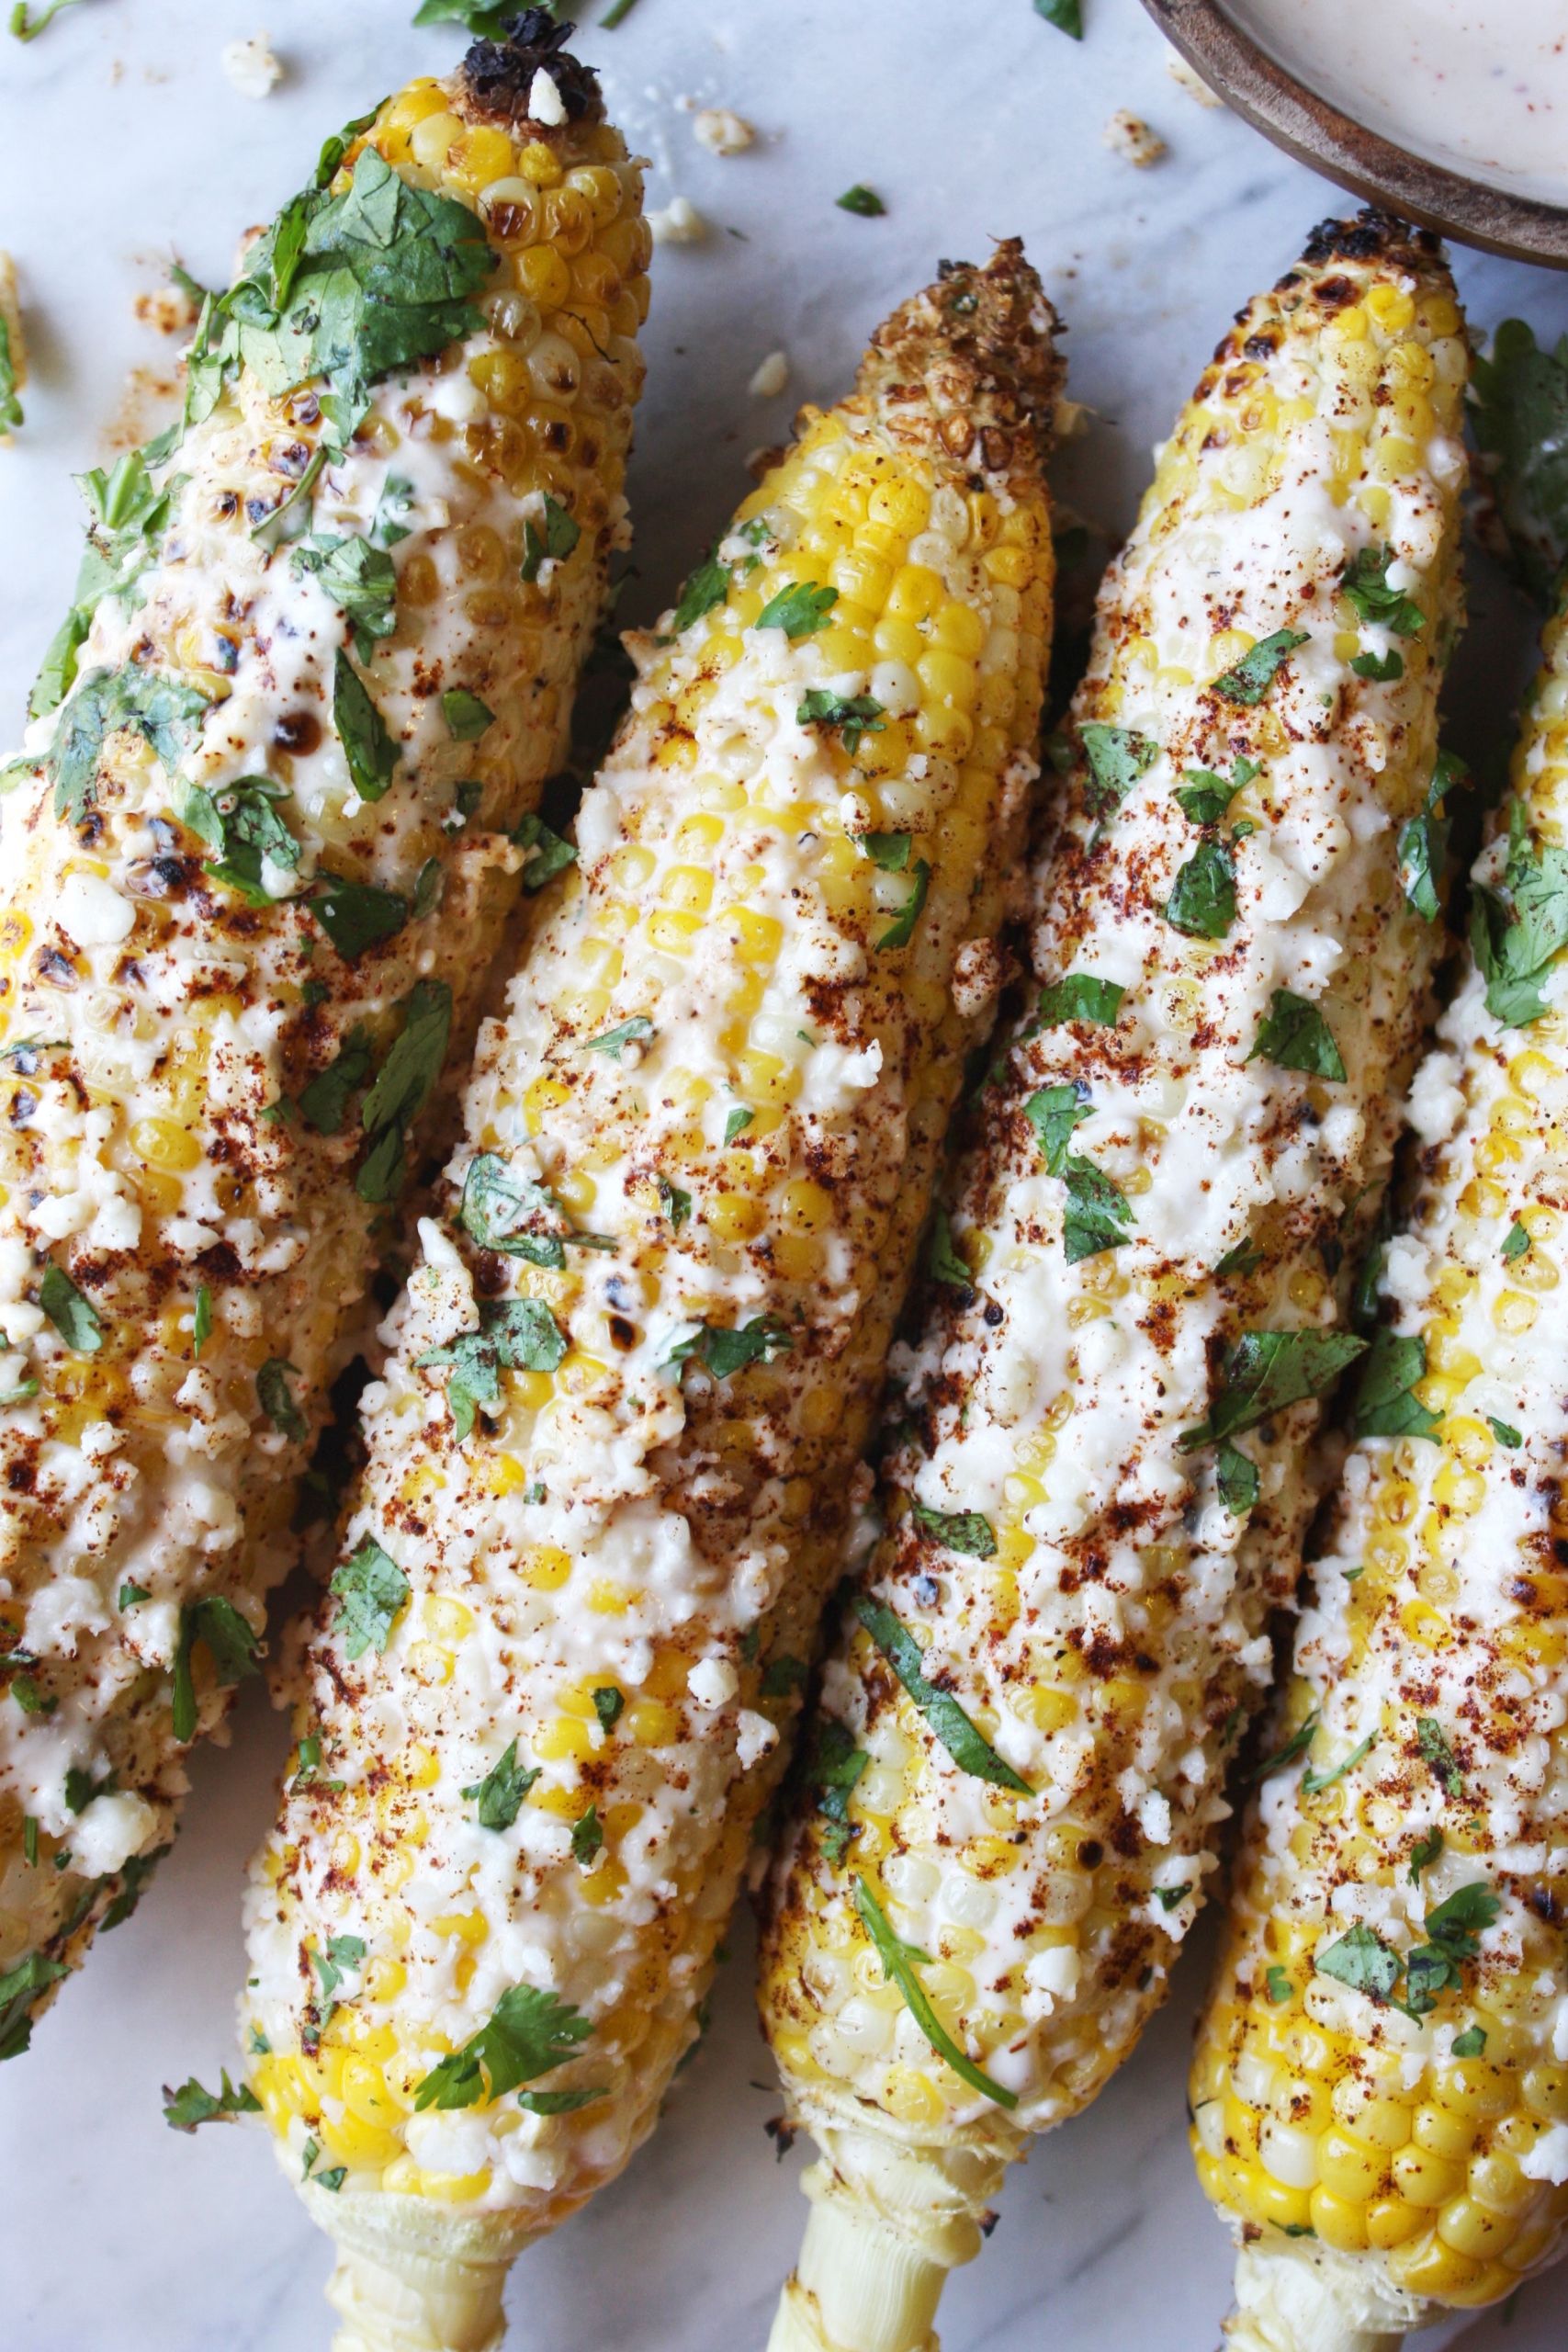 Grilled Mexican Street Corn Beautiful Grilled Mexican Street Corn